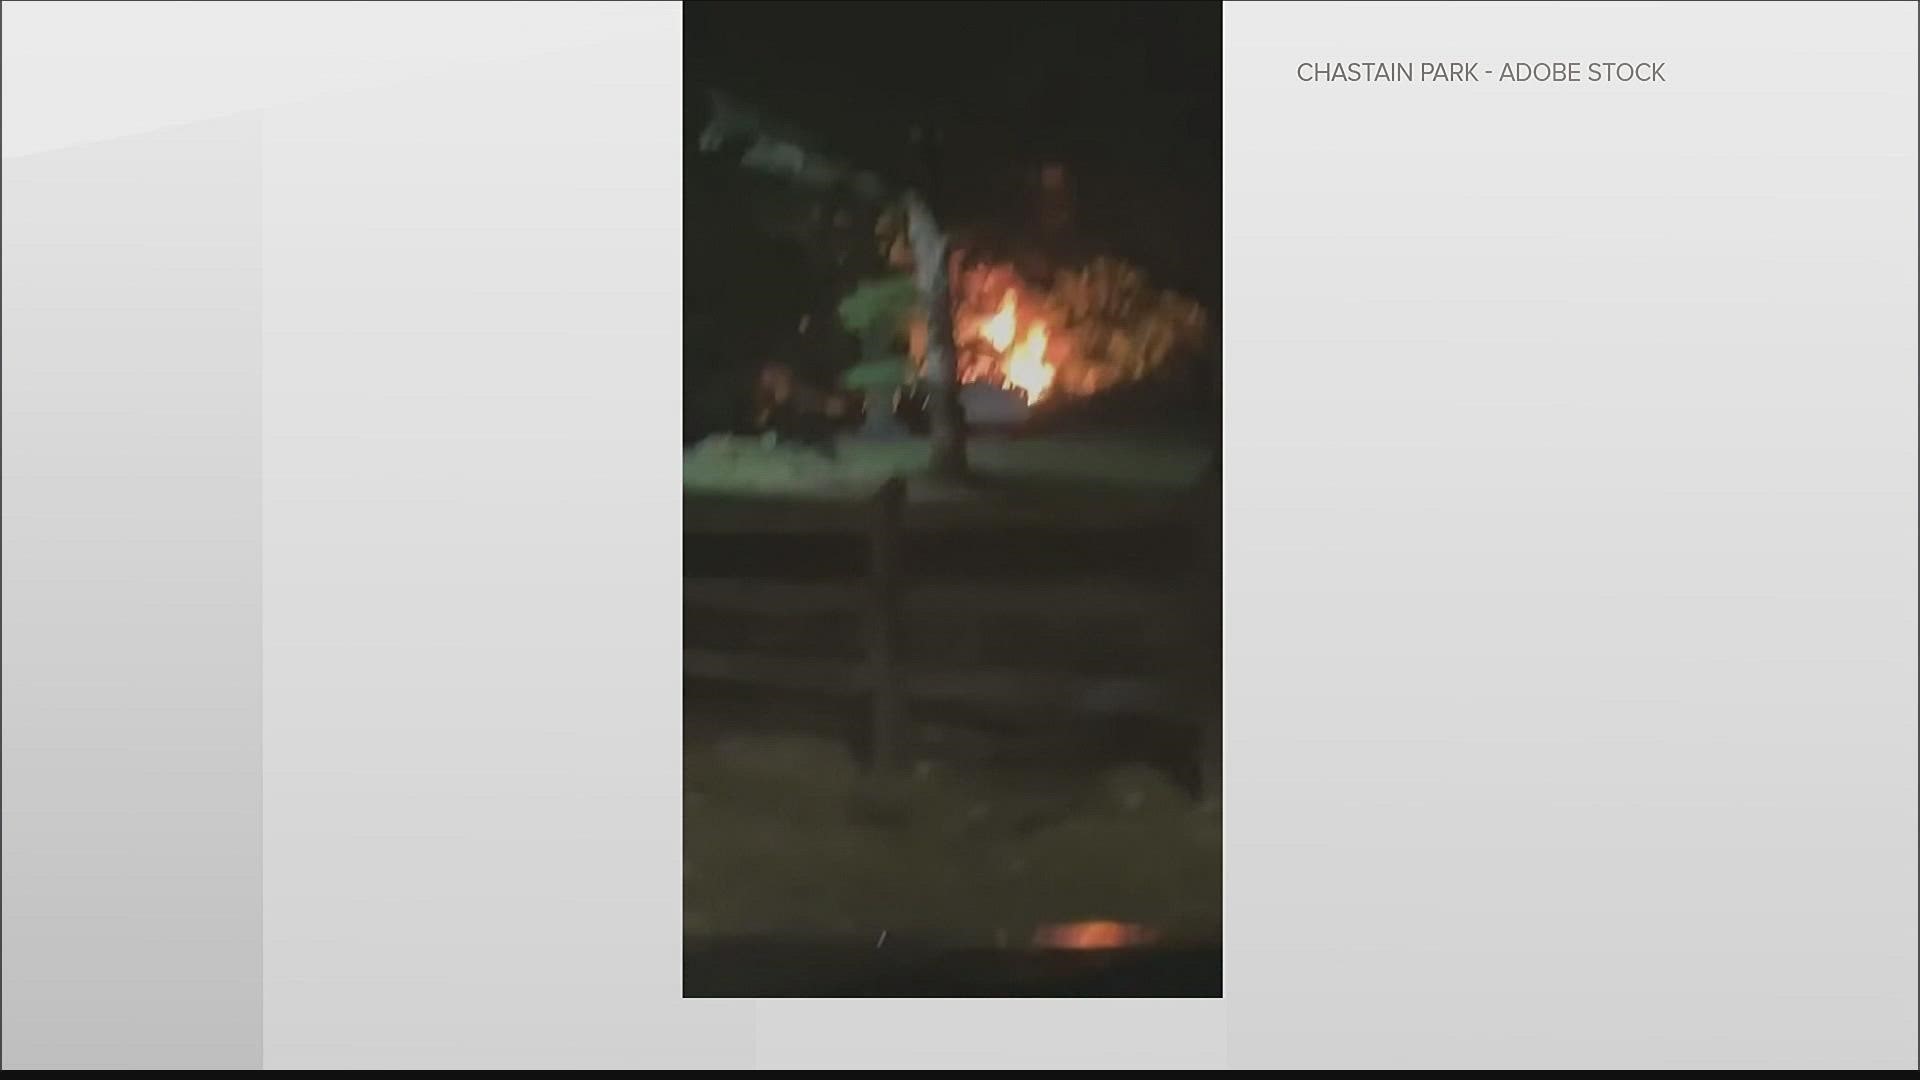 Atlanta Police are investigating what they are calling a potential arson over at Chastain Park.